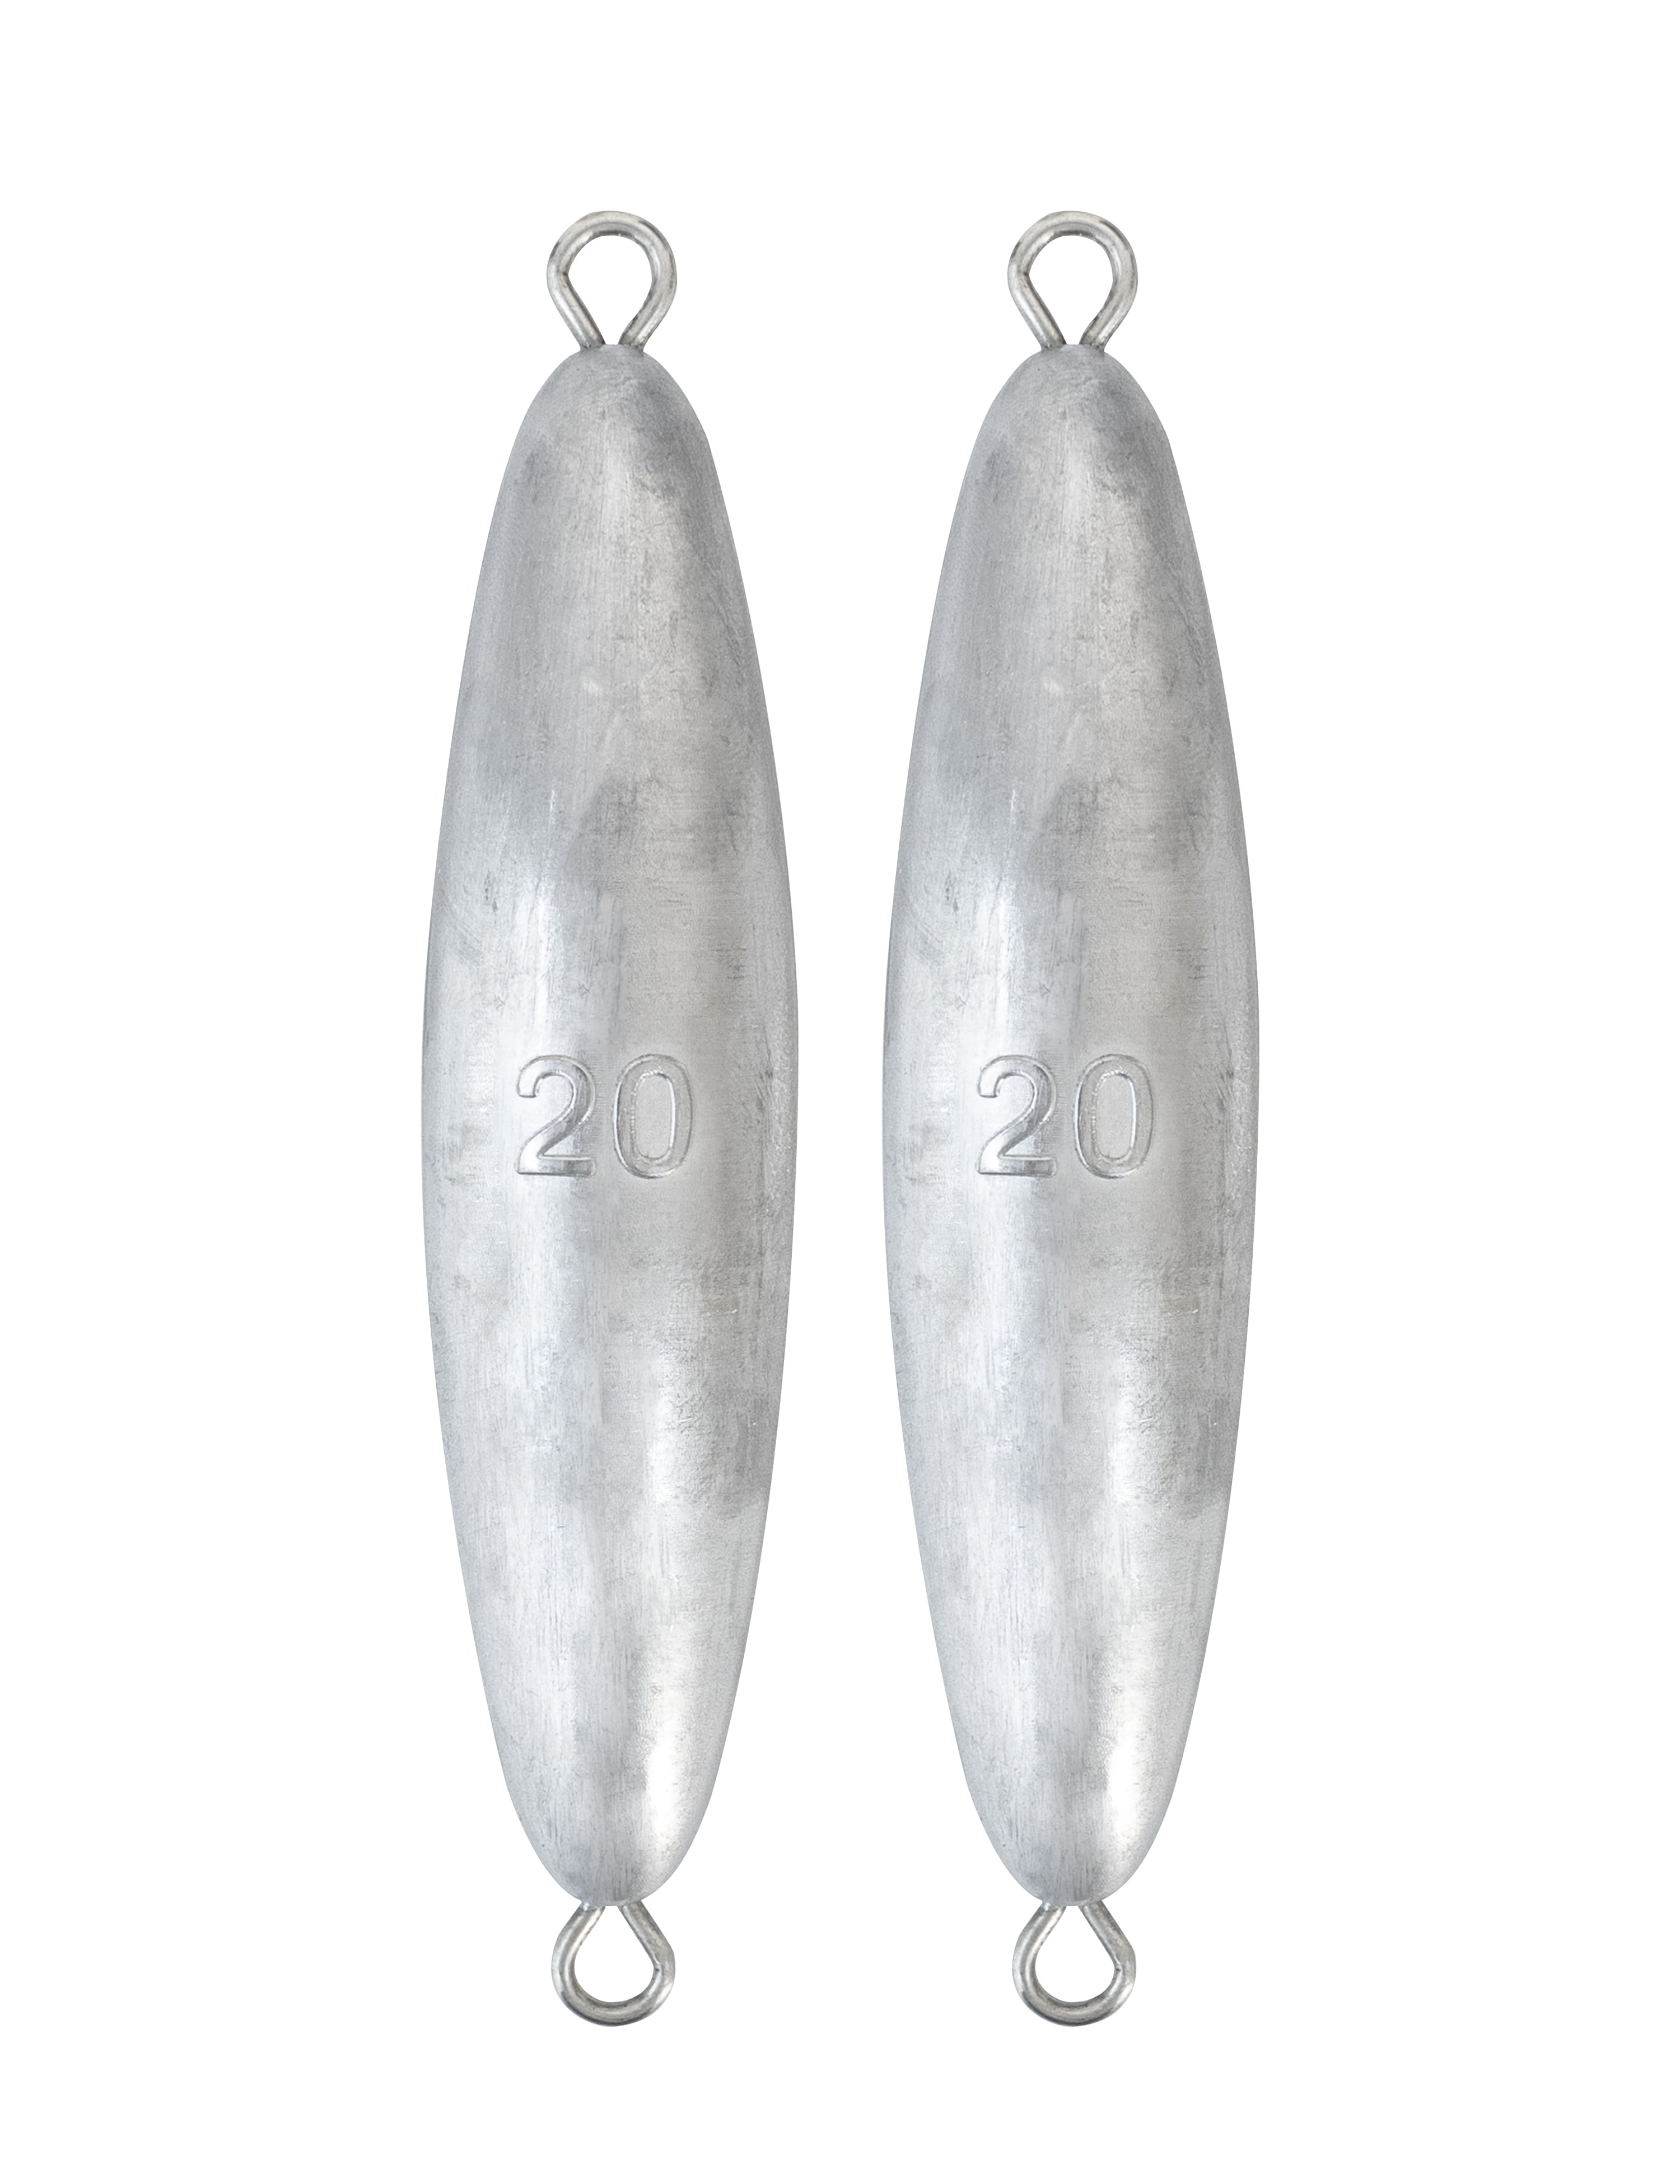 BLUEWING 20oz Torpedo Sinker 2pcs Fishing Weight Sinkers Saltwater Bullet  Lead Fishing Sinkers Double Ringed Fishing Weights for Bottom Fishing 